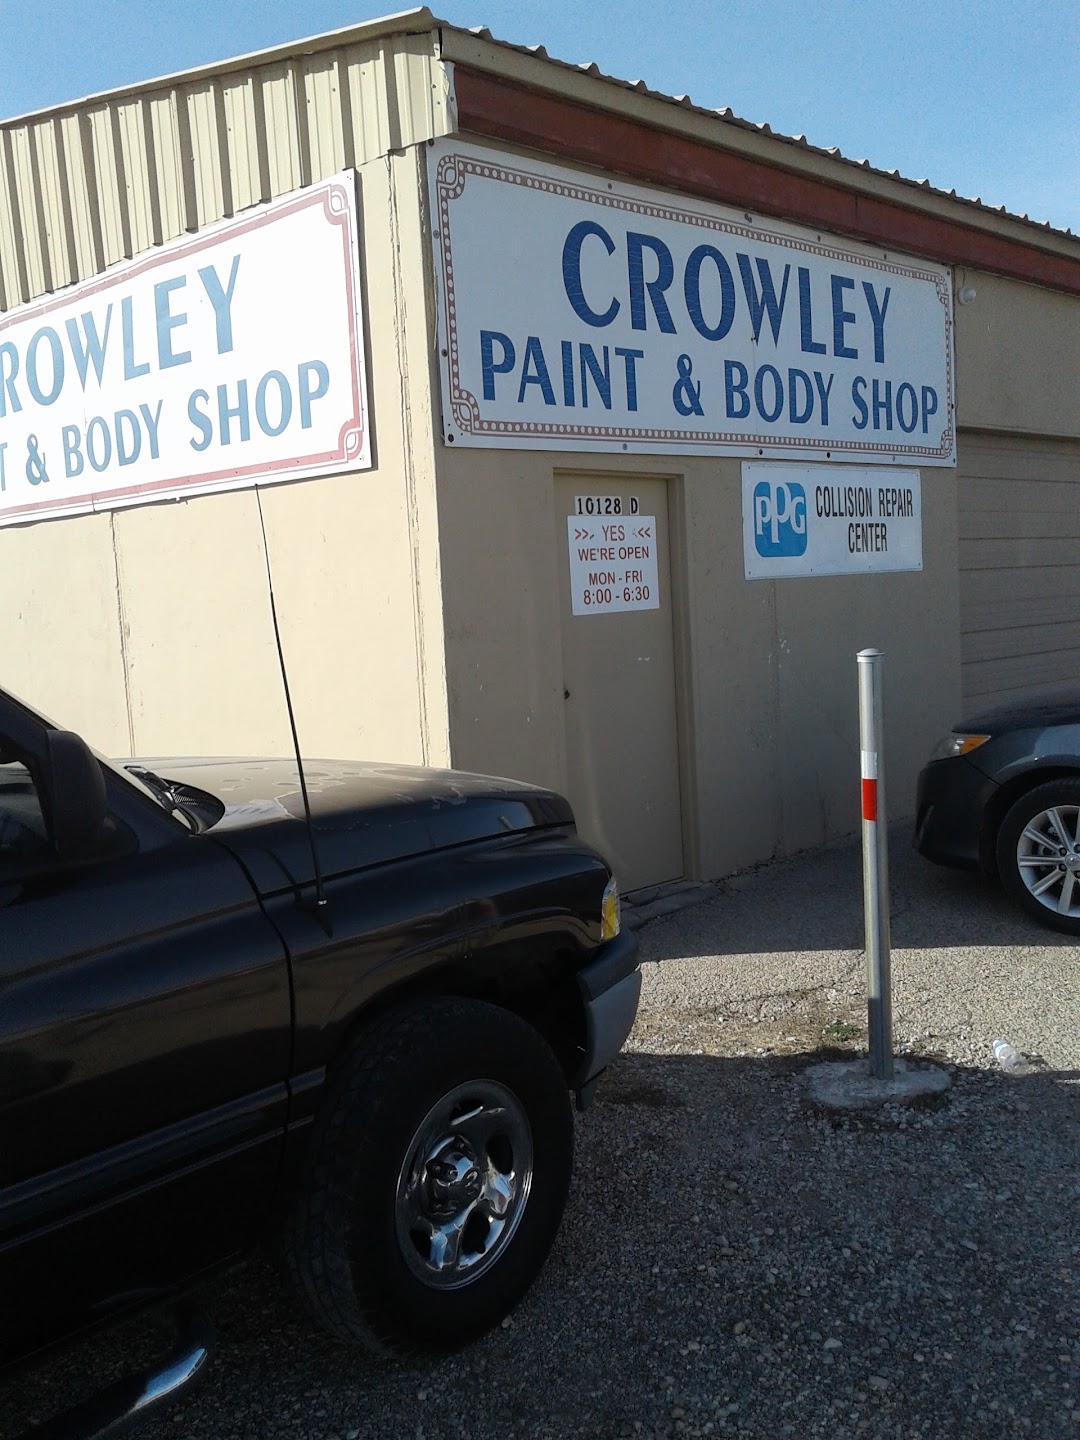 Crowley Paint & Body